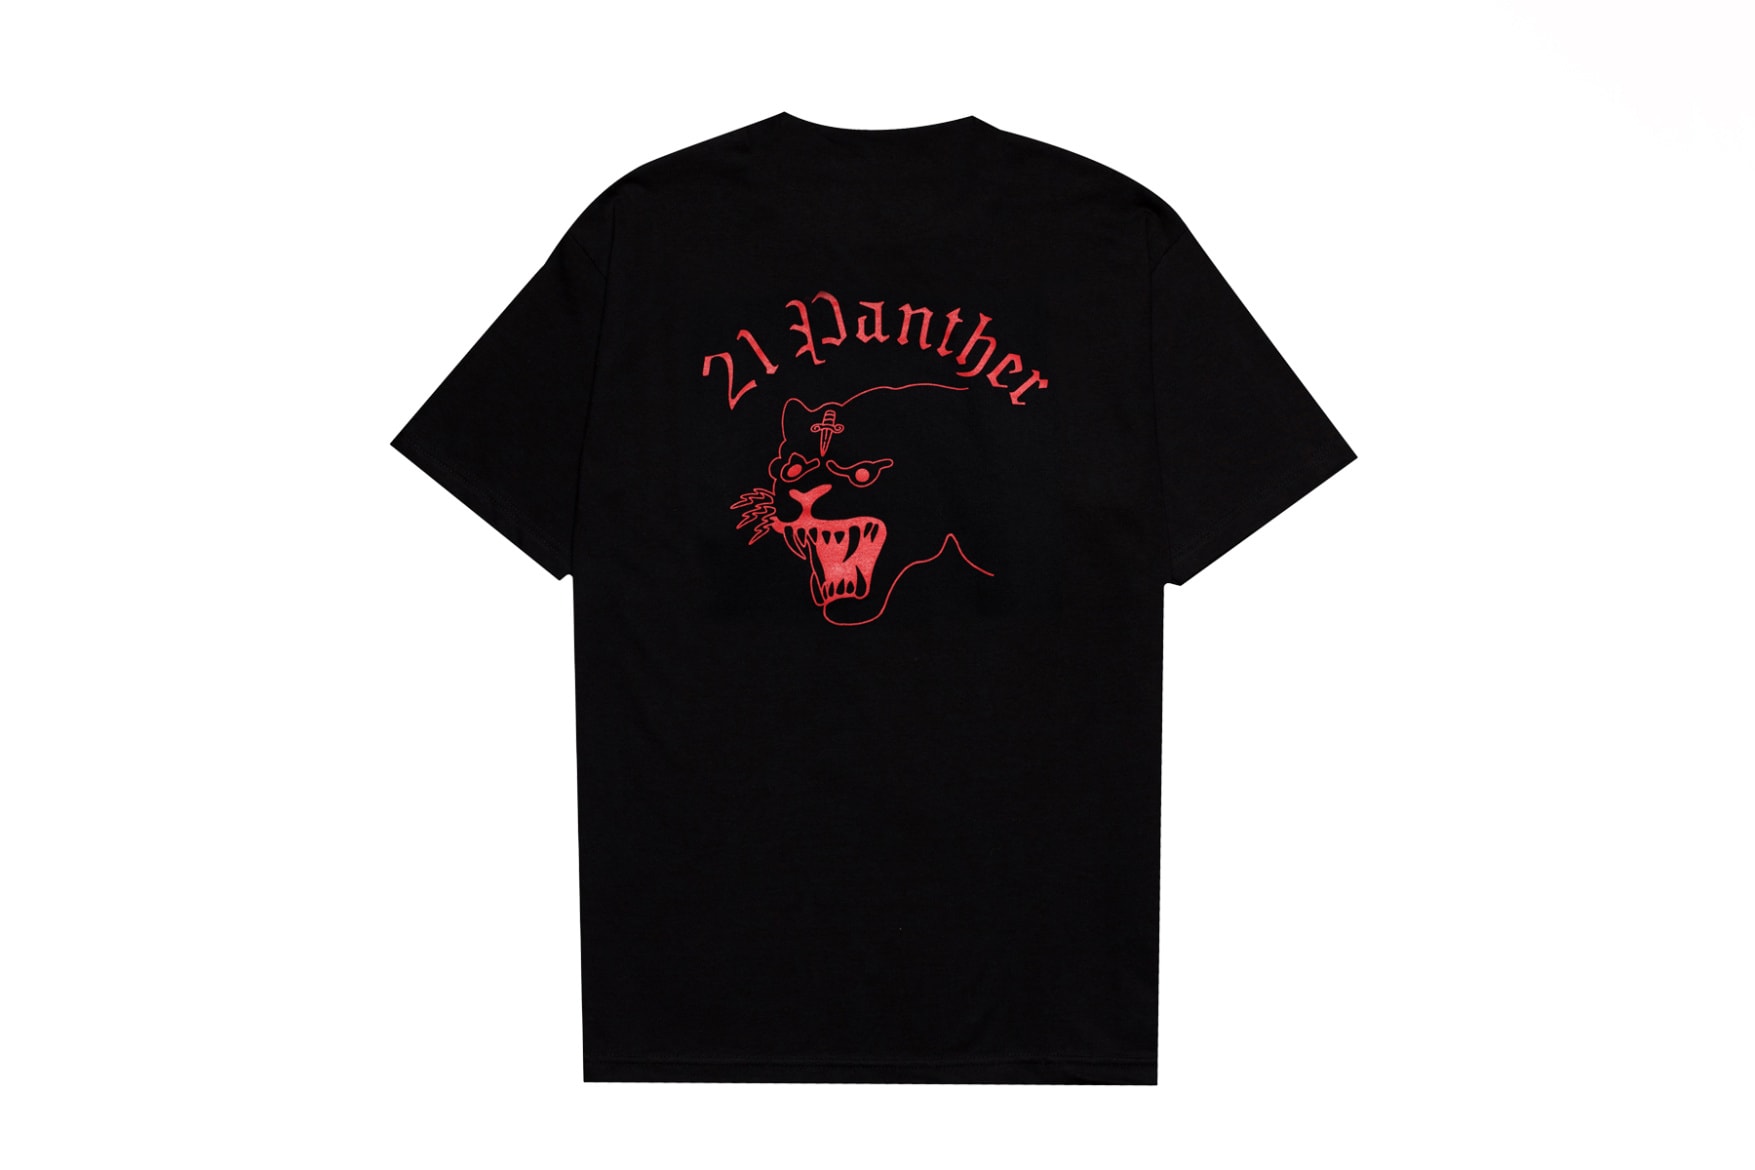 Rare Panther 21 Savage Exclusive Collaboration